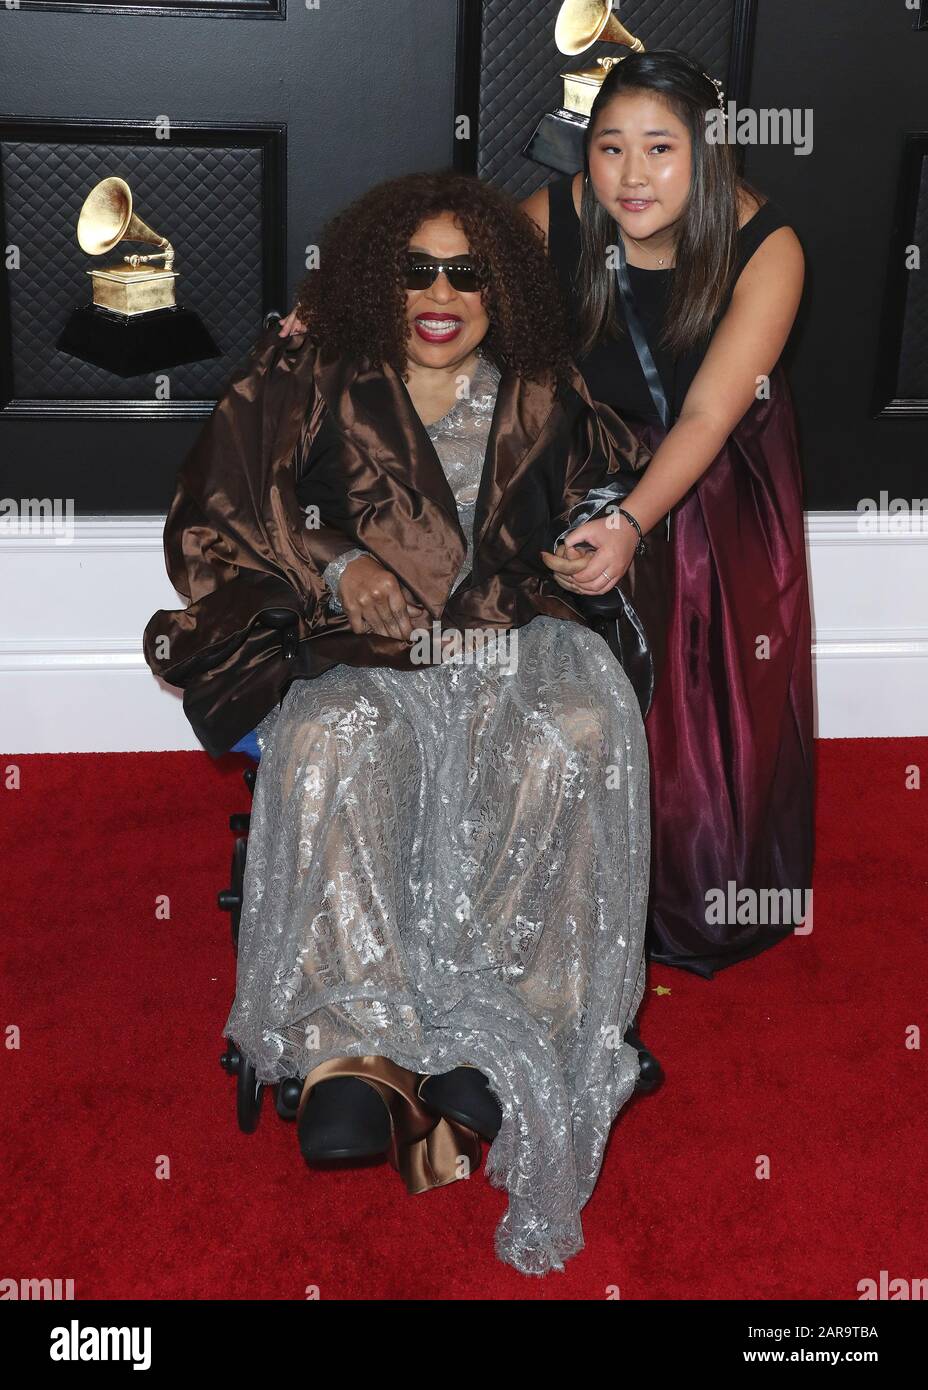 Los Angeles, United States. 26th Jan, 2020. LOS ANGELES, CALIFORNIA, USA - JANUARY 26: Roberta Flack and Kira Koga arrive at the 62nd Annual GRAMMY Awards held at Staples Center on January 26, 2020 in Los Angeles, California, United States. (Photo by Xavier Collin/Image Press Agency) Credit: Image Press Agency/Alamy Live News Stock Photo